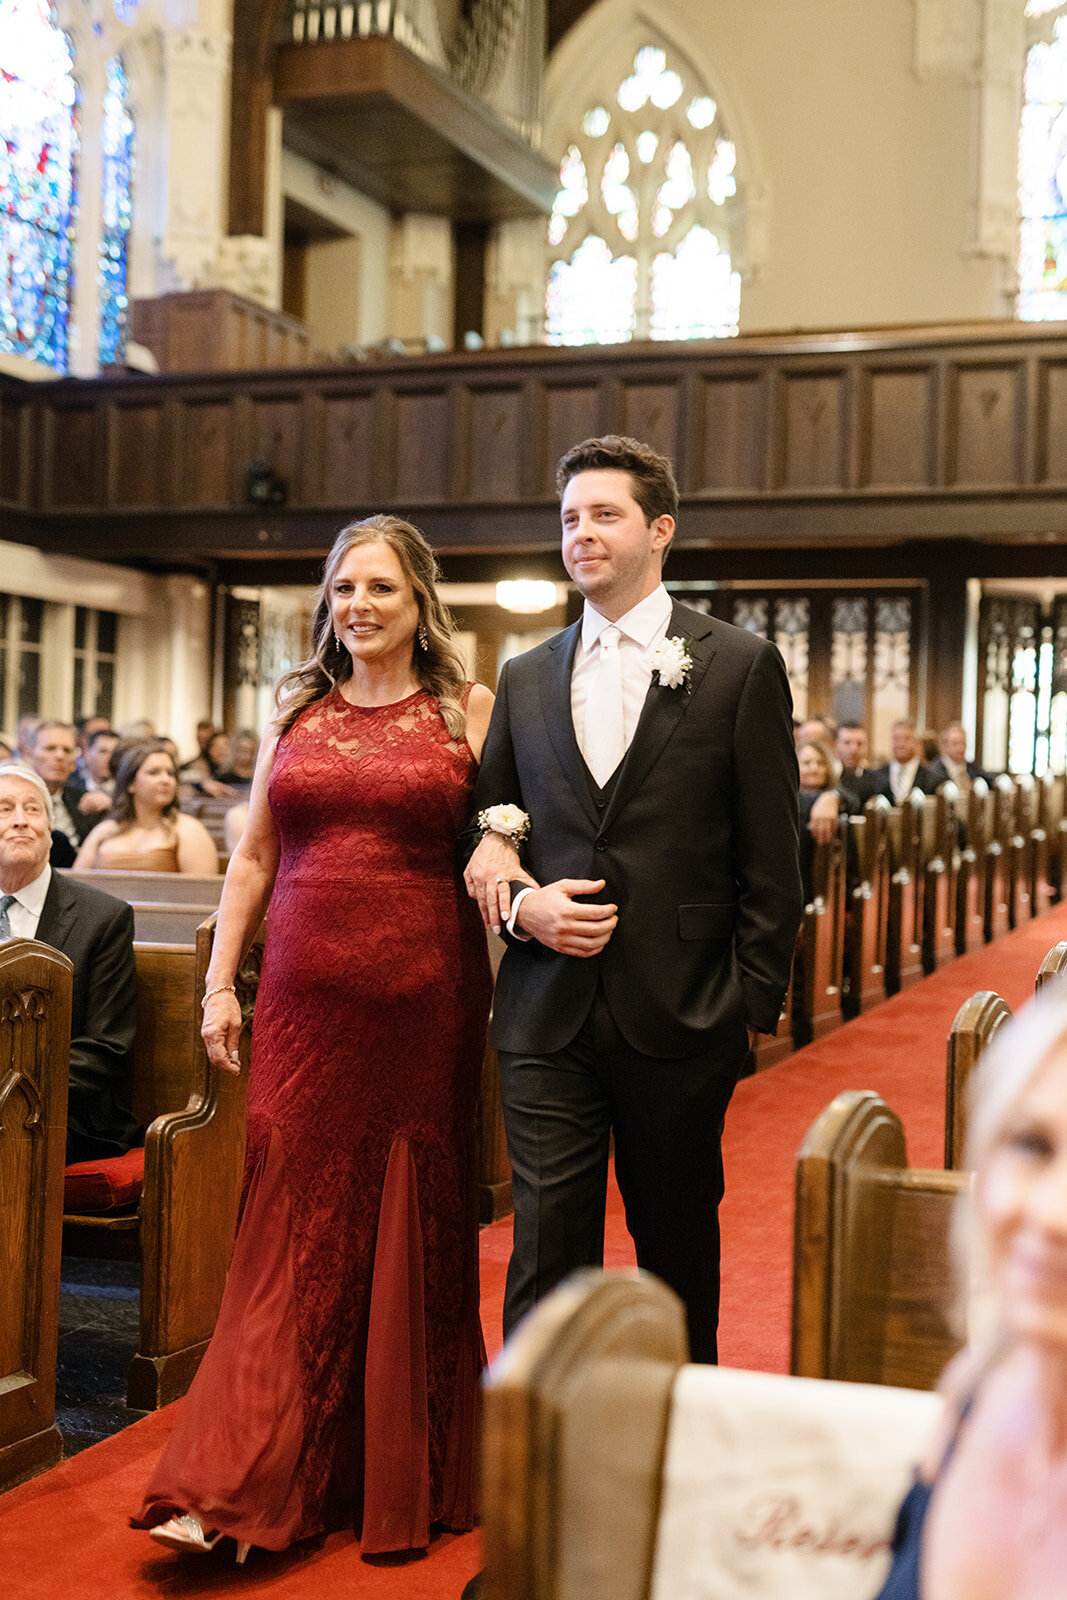 Kylie and Jack at The Grand Hall - Kansas City Wedding Photograpy - Nick and Lexie Photo Film-584